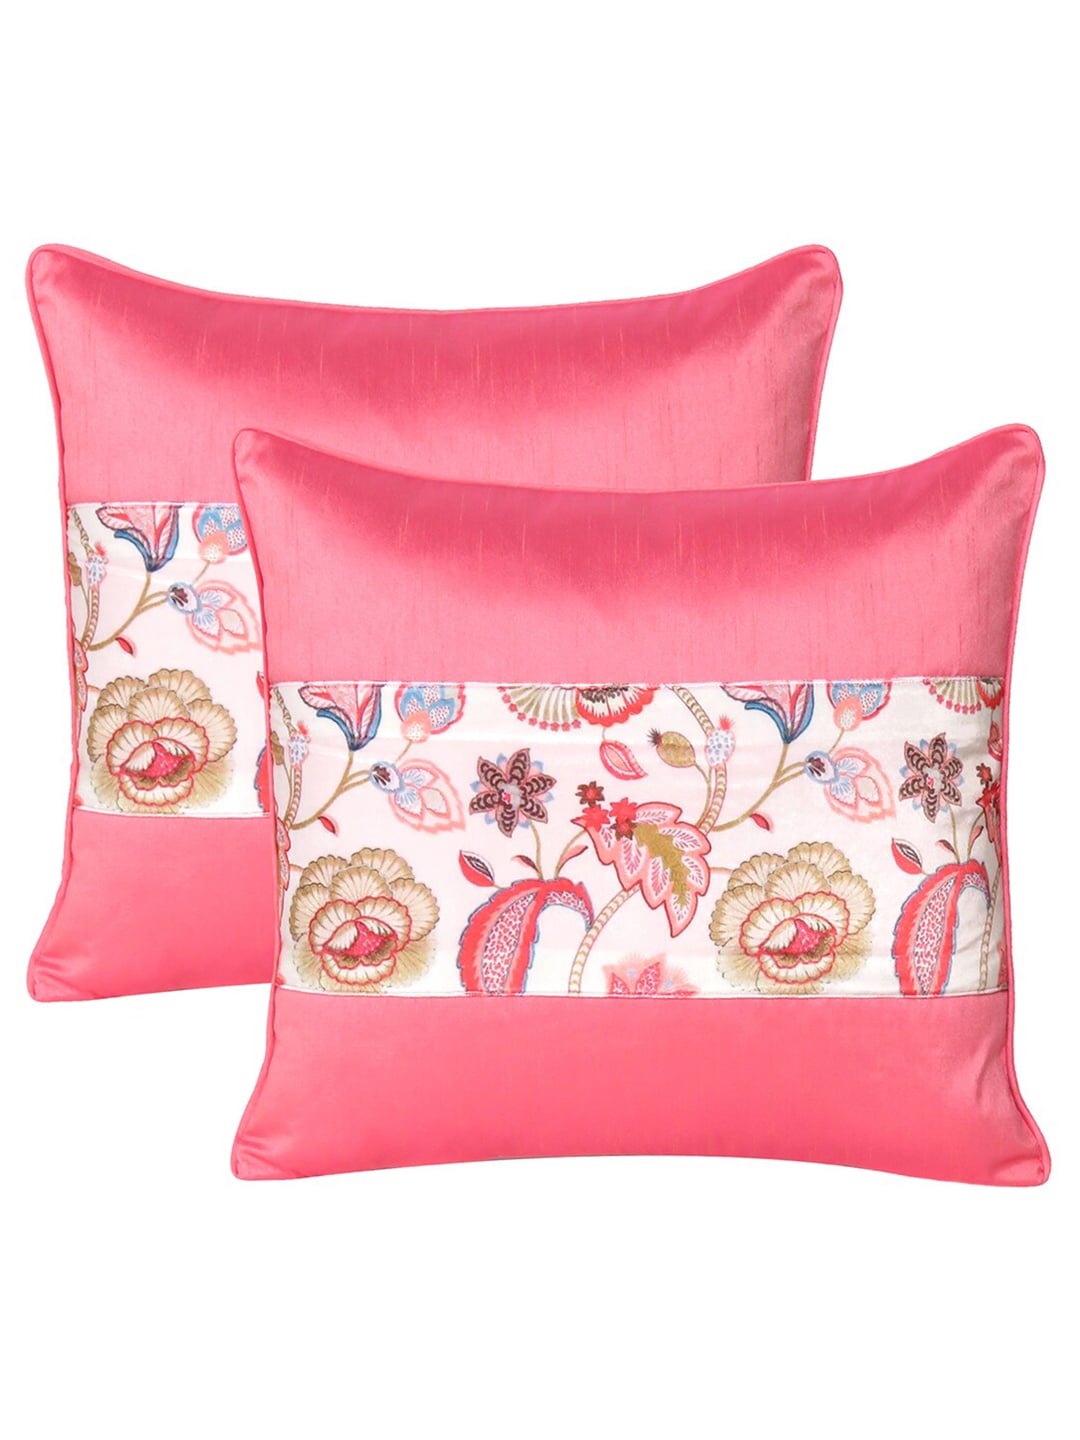 OUSSUM Pink & White Set of 2 Floral Velvet Square Cushion Covers Price in India